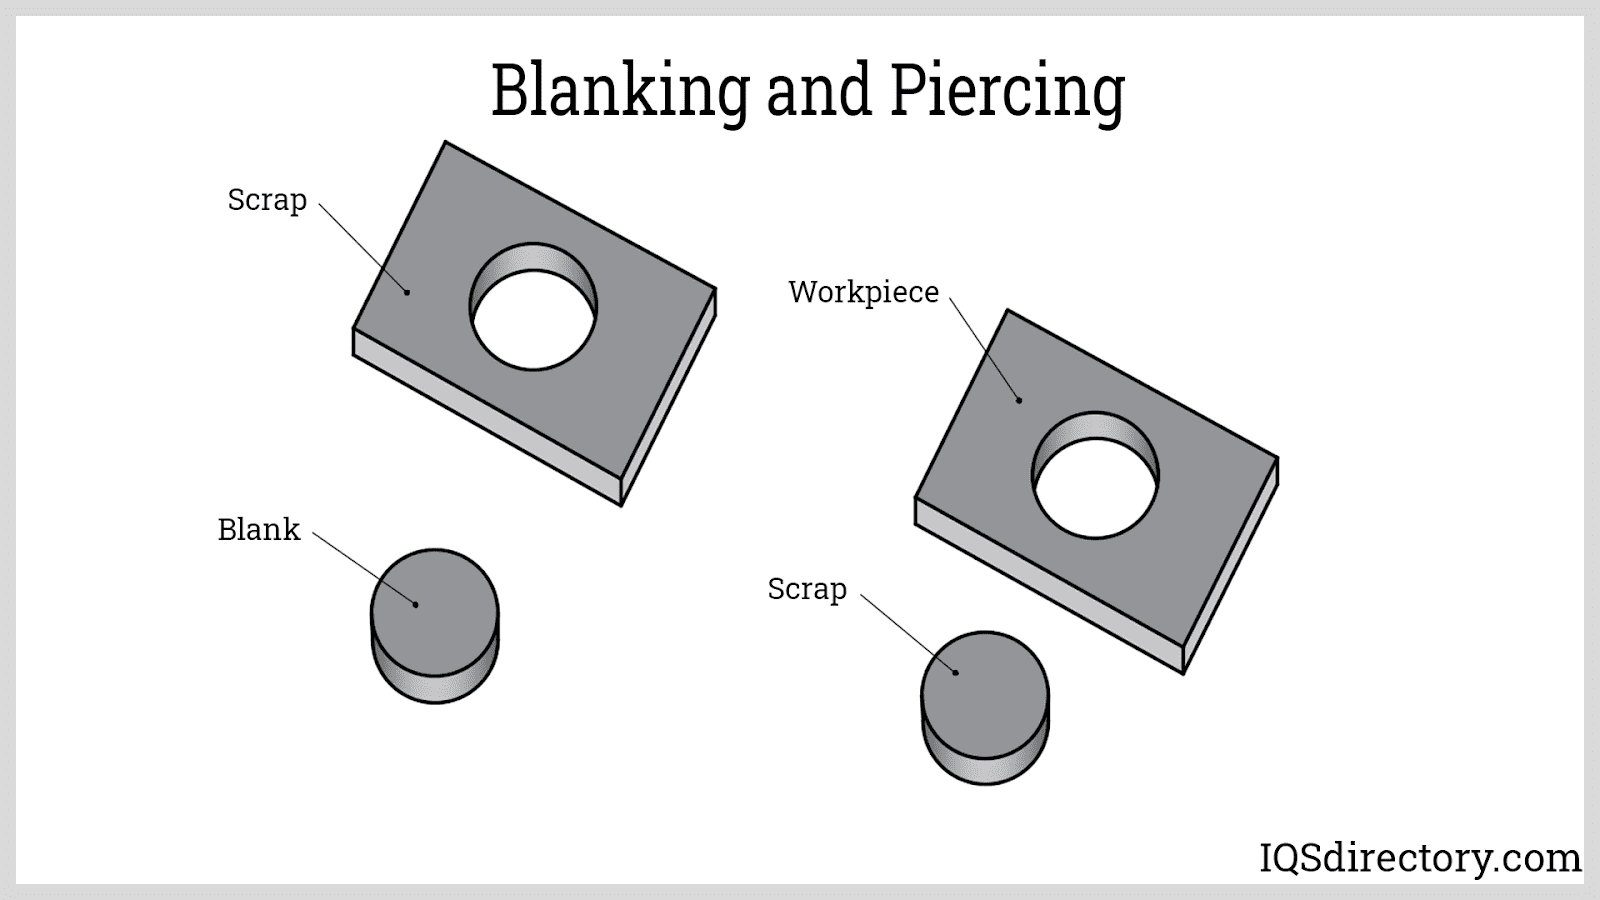 Blanking and Piercing